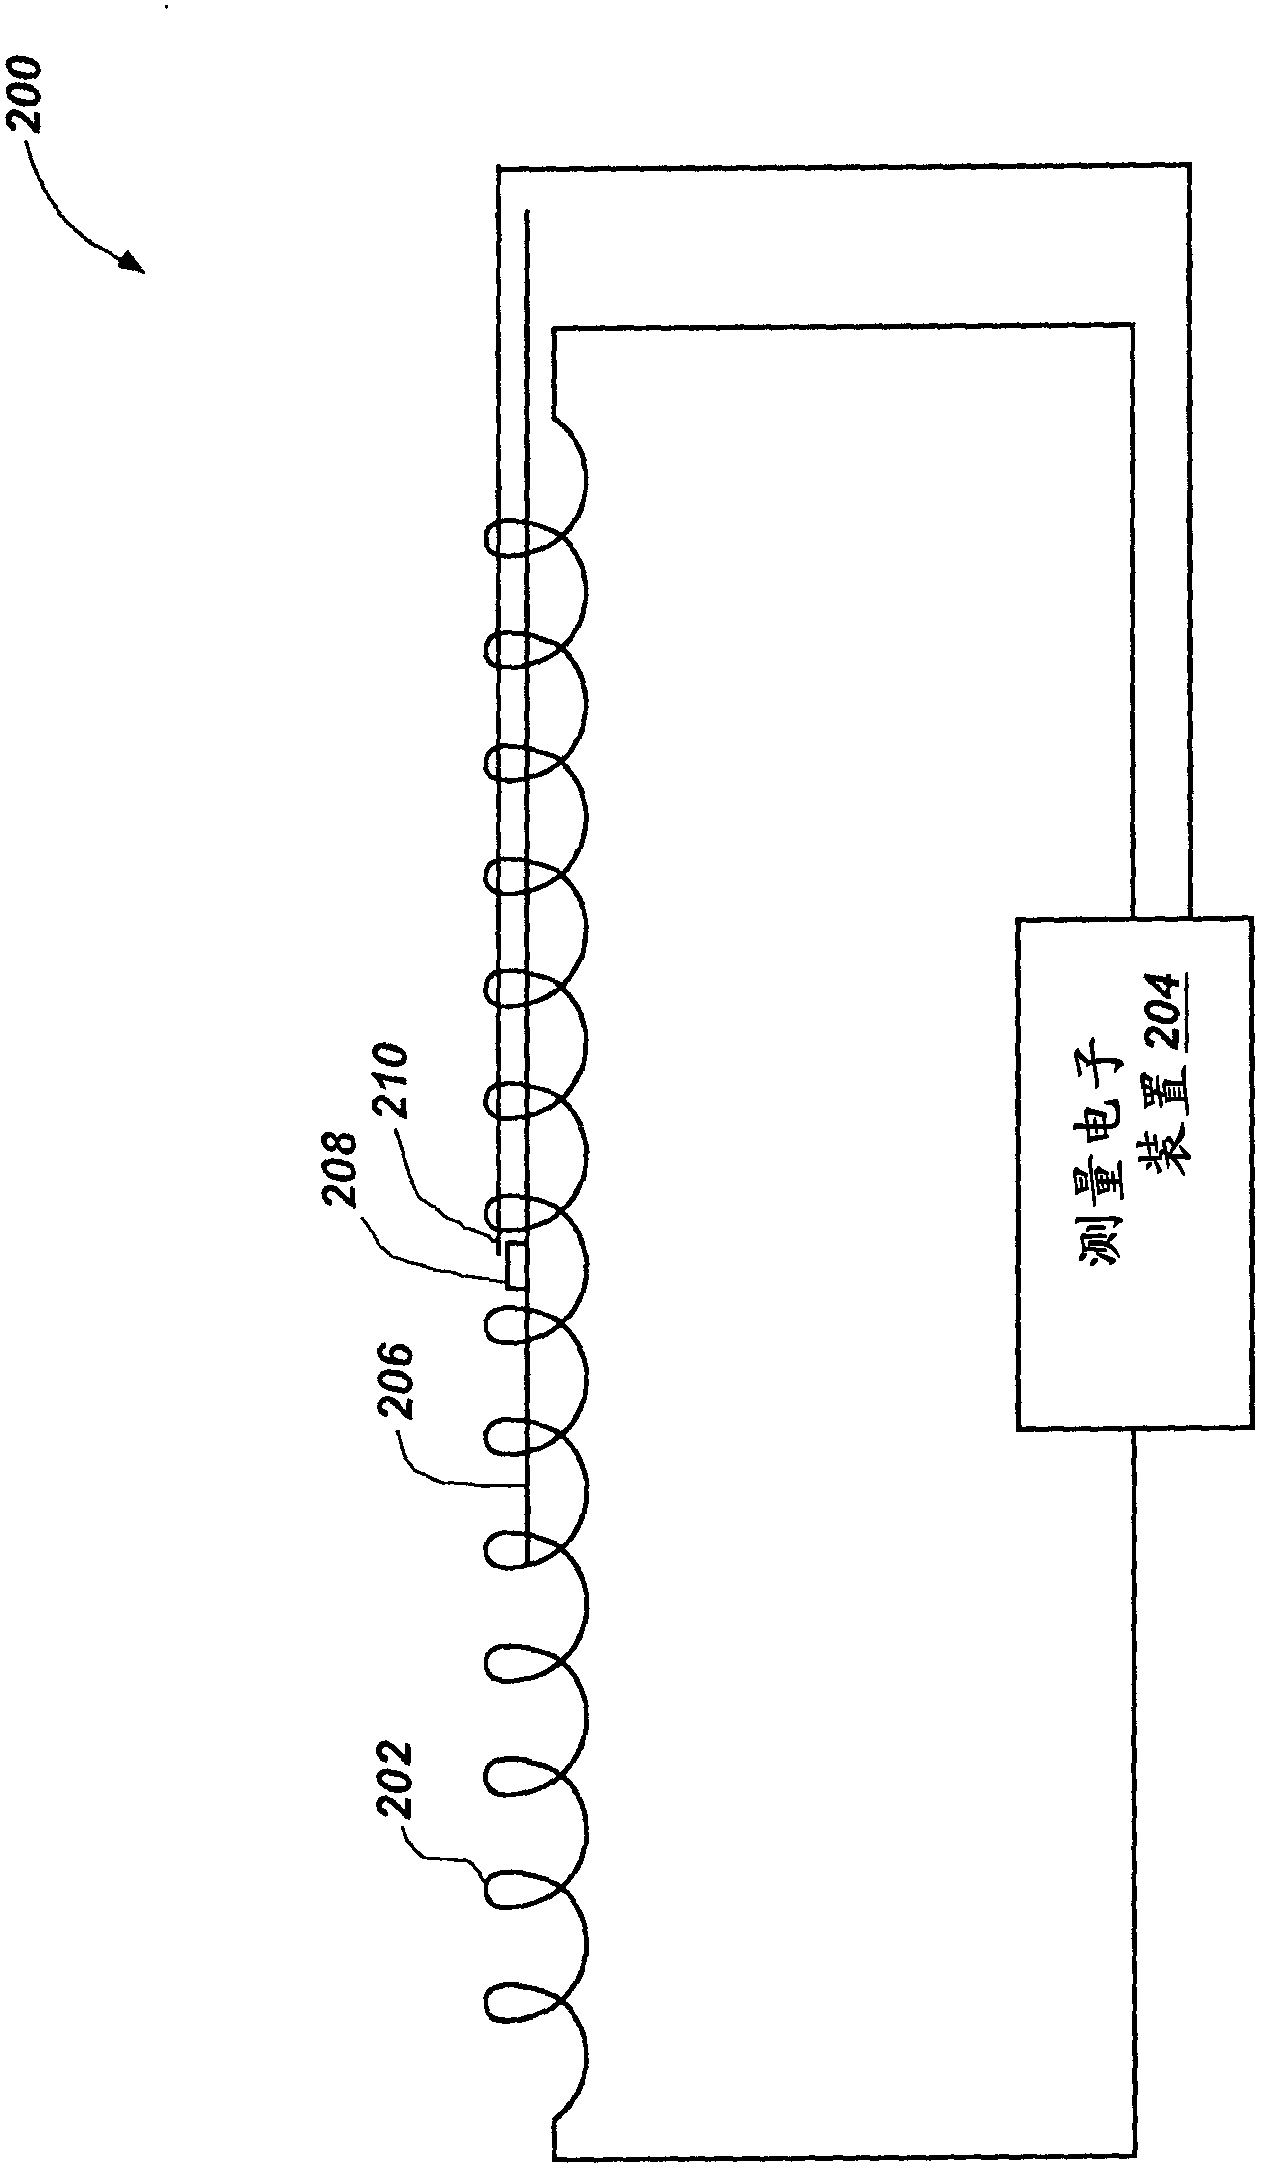 Polycrystalline diamond compacts, method of fabricating same, and various applications